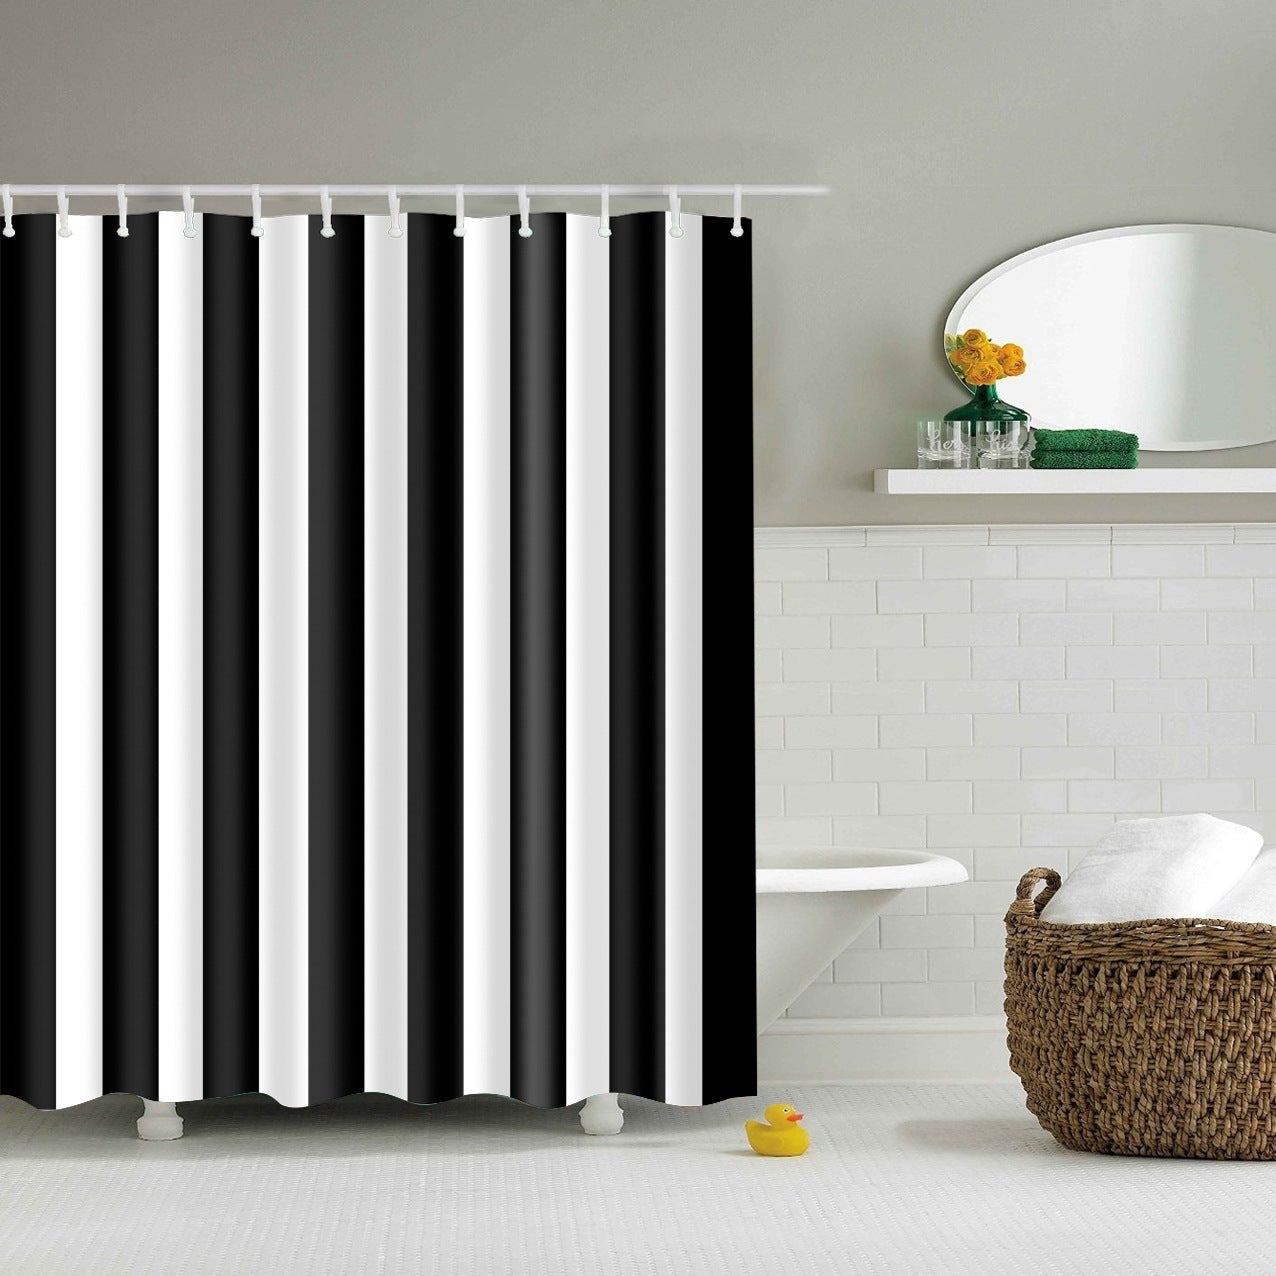 Black and White Striped Bathroom Fabric Shower Curtain-STYLEGOING